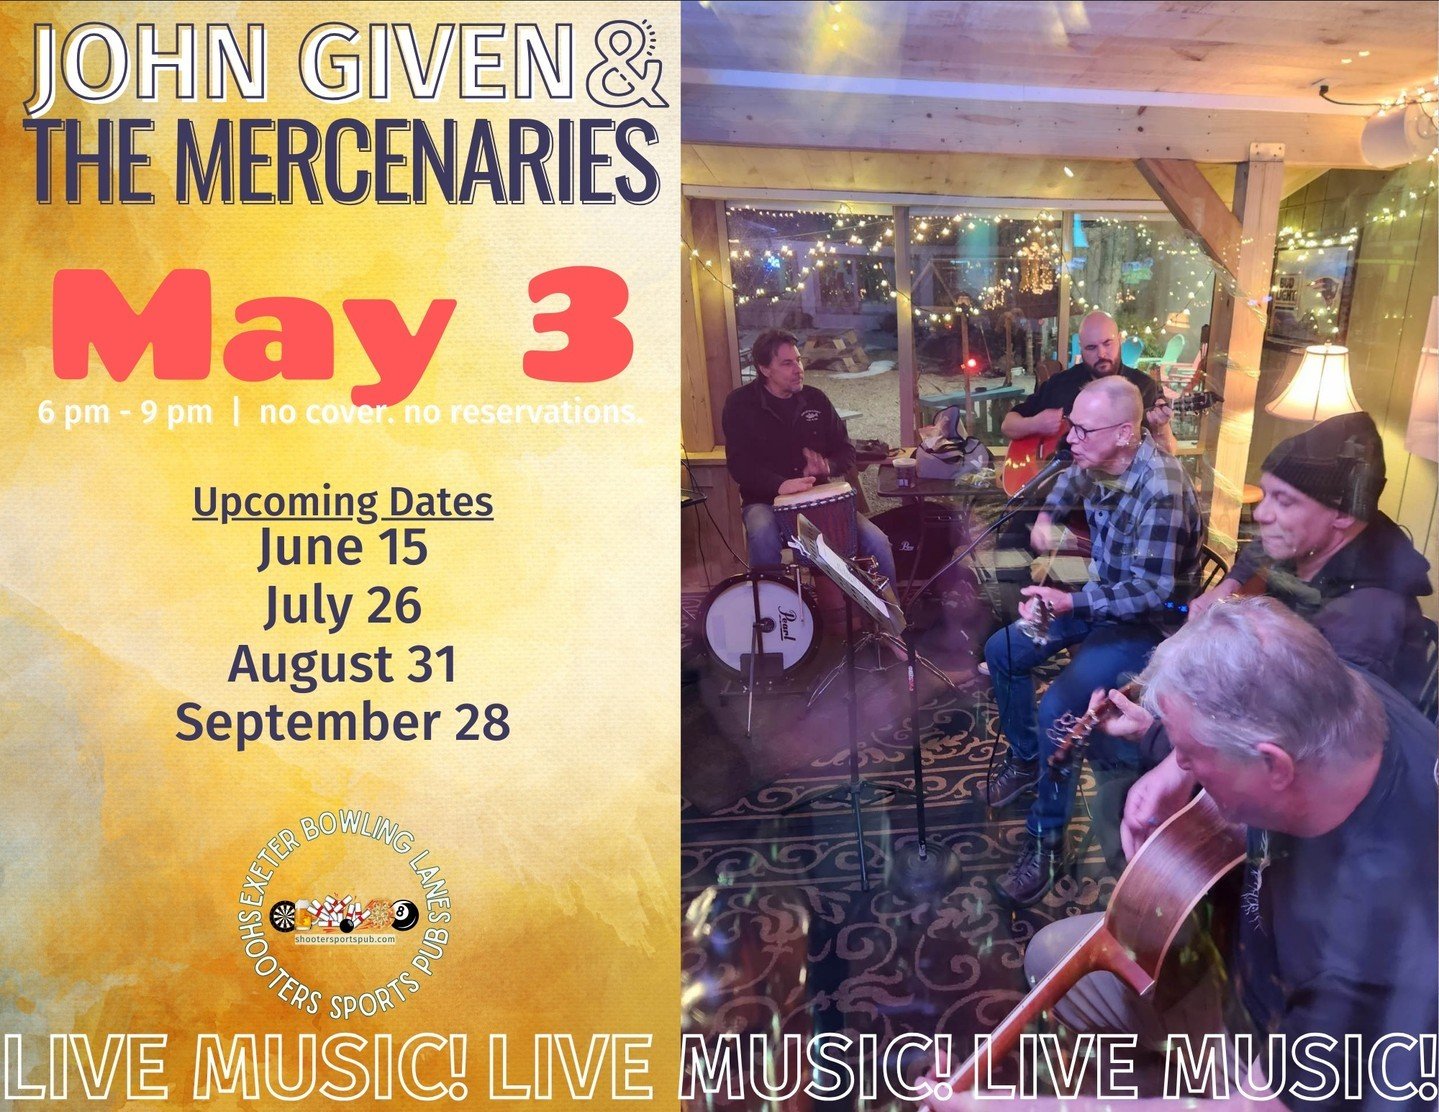 🎶 Get ready for an epic night with John Given &amp; The Mercenaries on May 3rd! 🌤️ ⁠
⁠
Beer garden or porch, we&rsquo;re set for any weather. ⁠
⁠
#LiveMusic #ShootersGig⁠
⁠